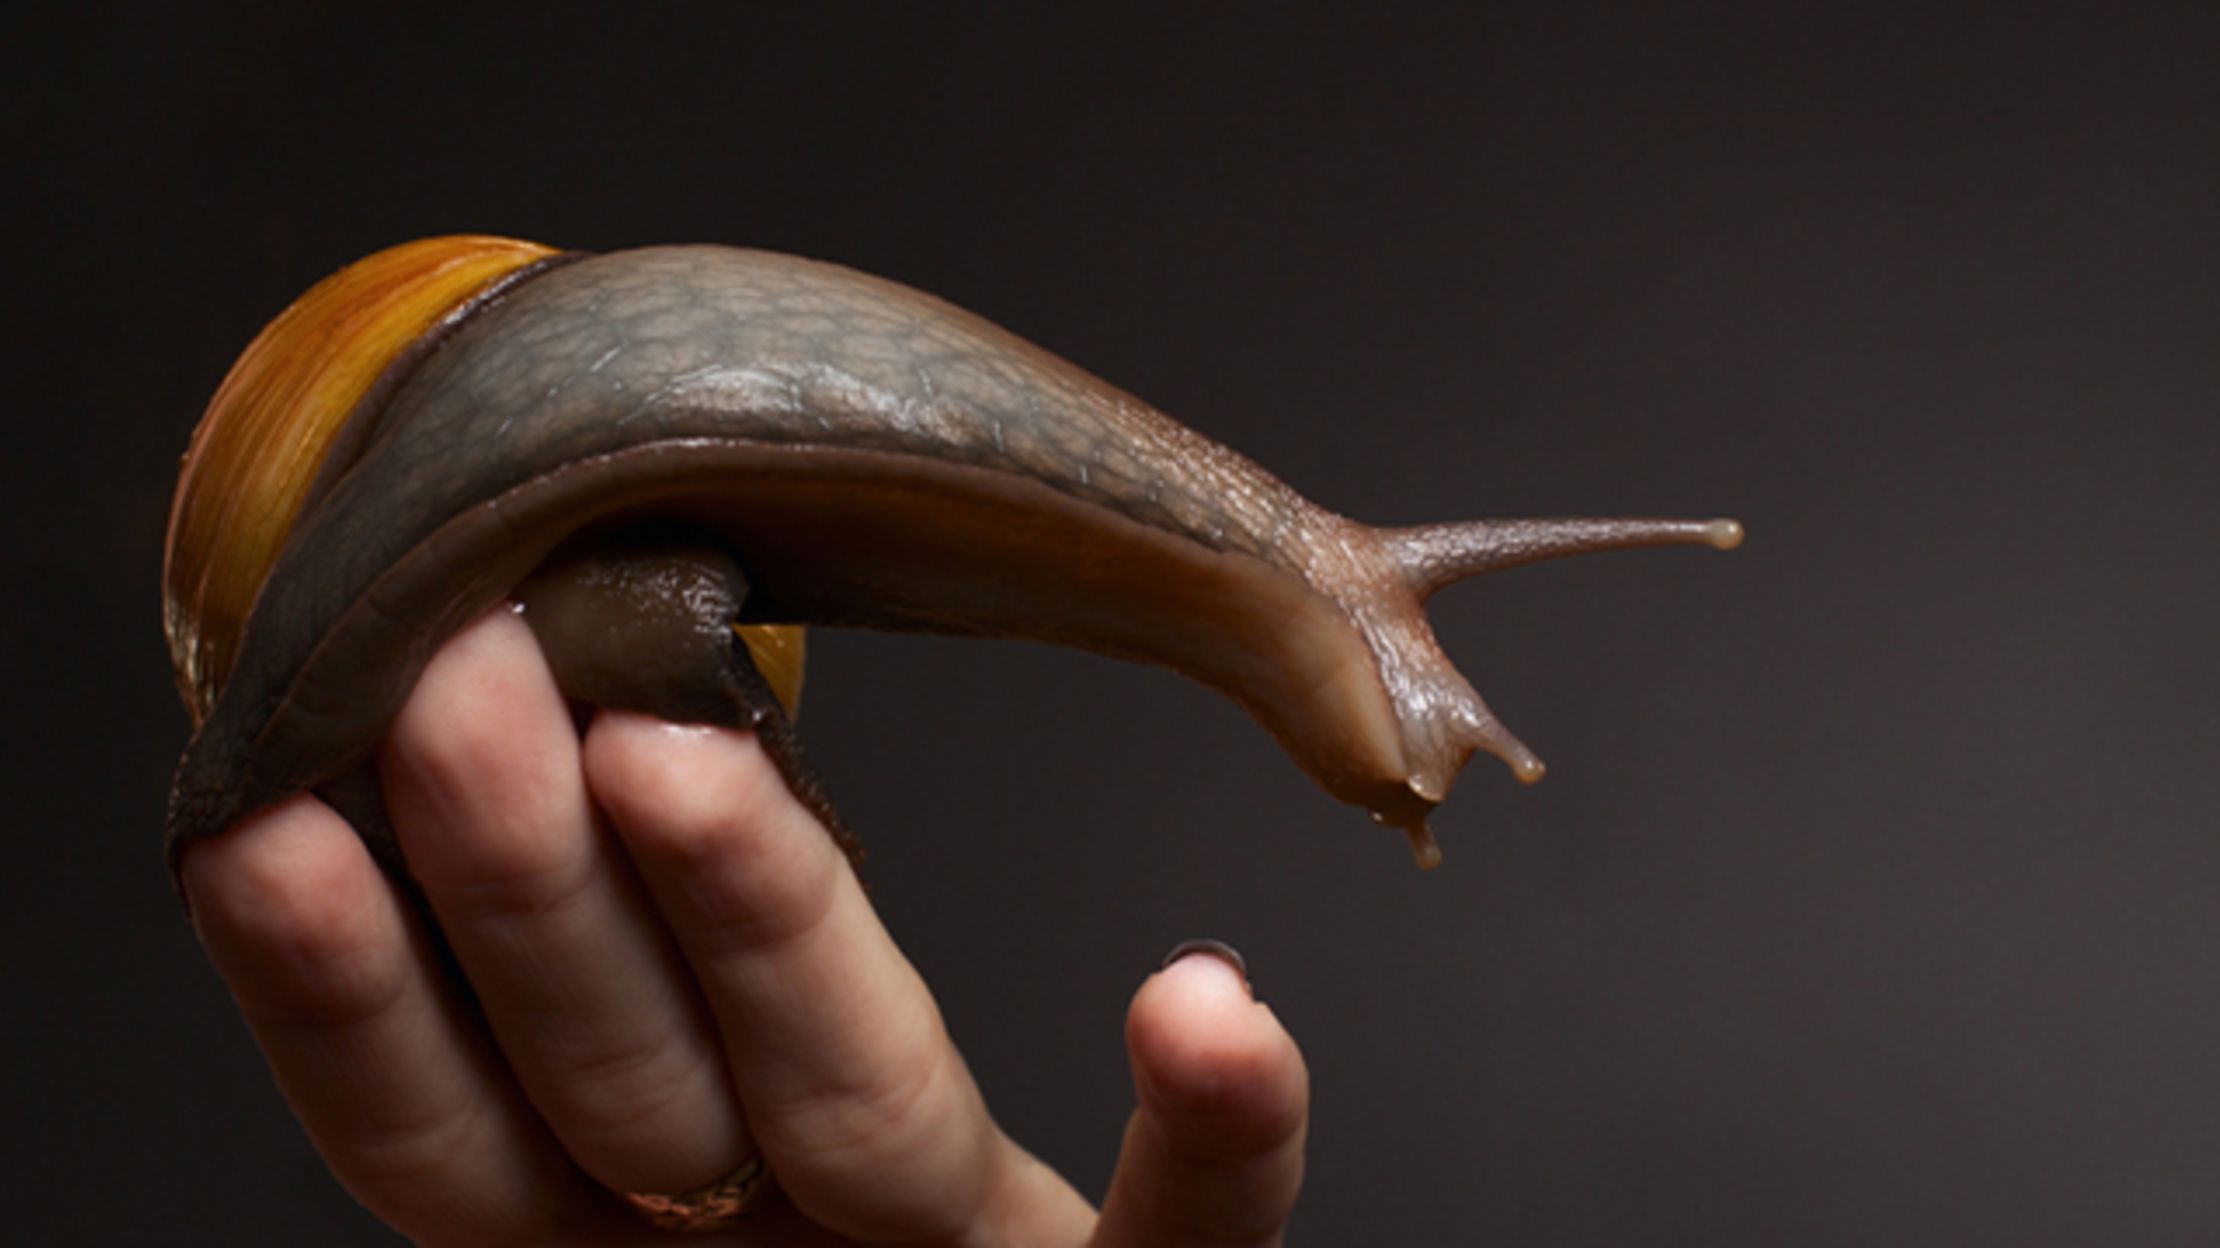 16 Surprisingly Fast Facts About Snails Mental Floss